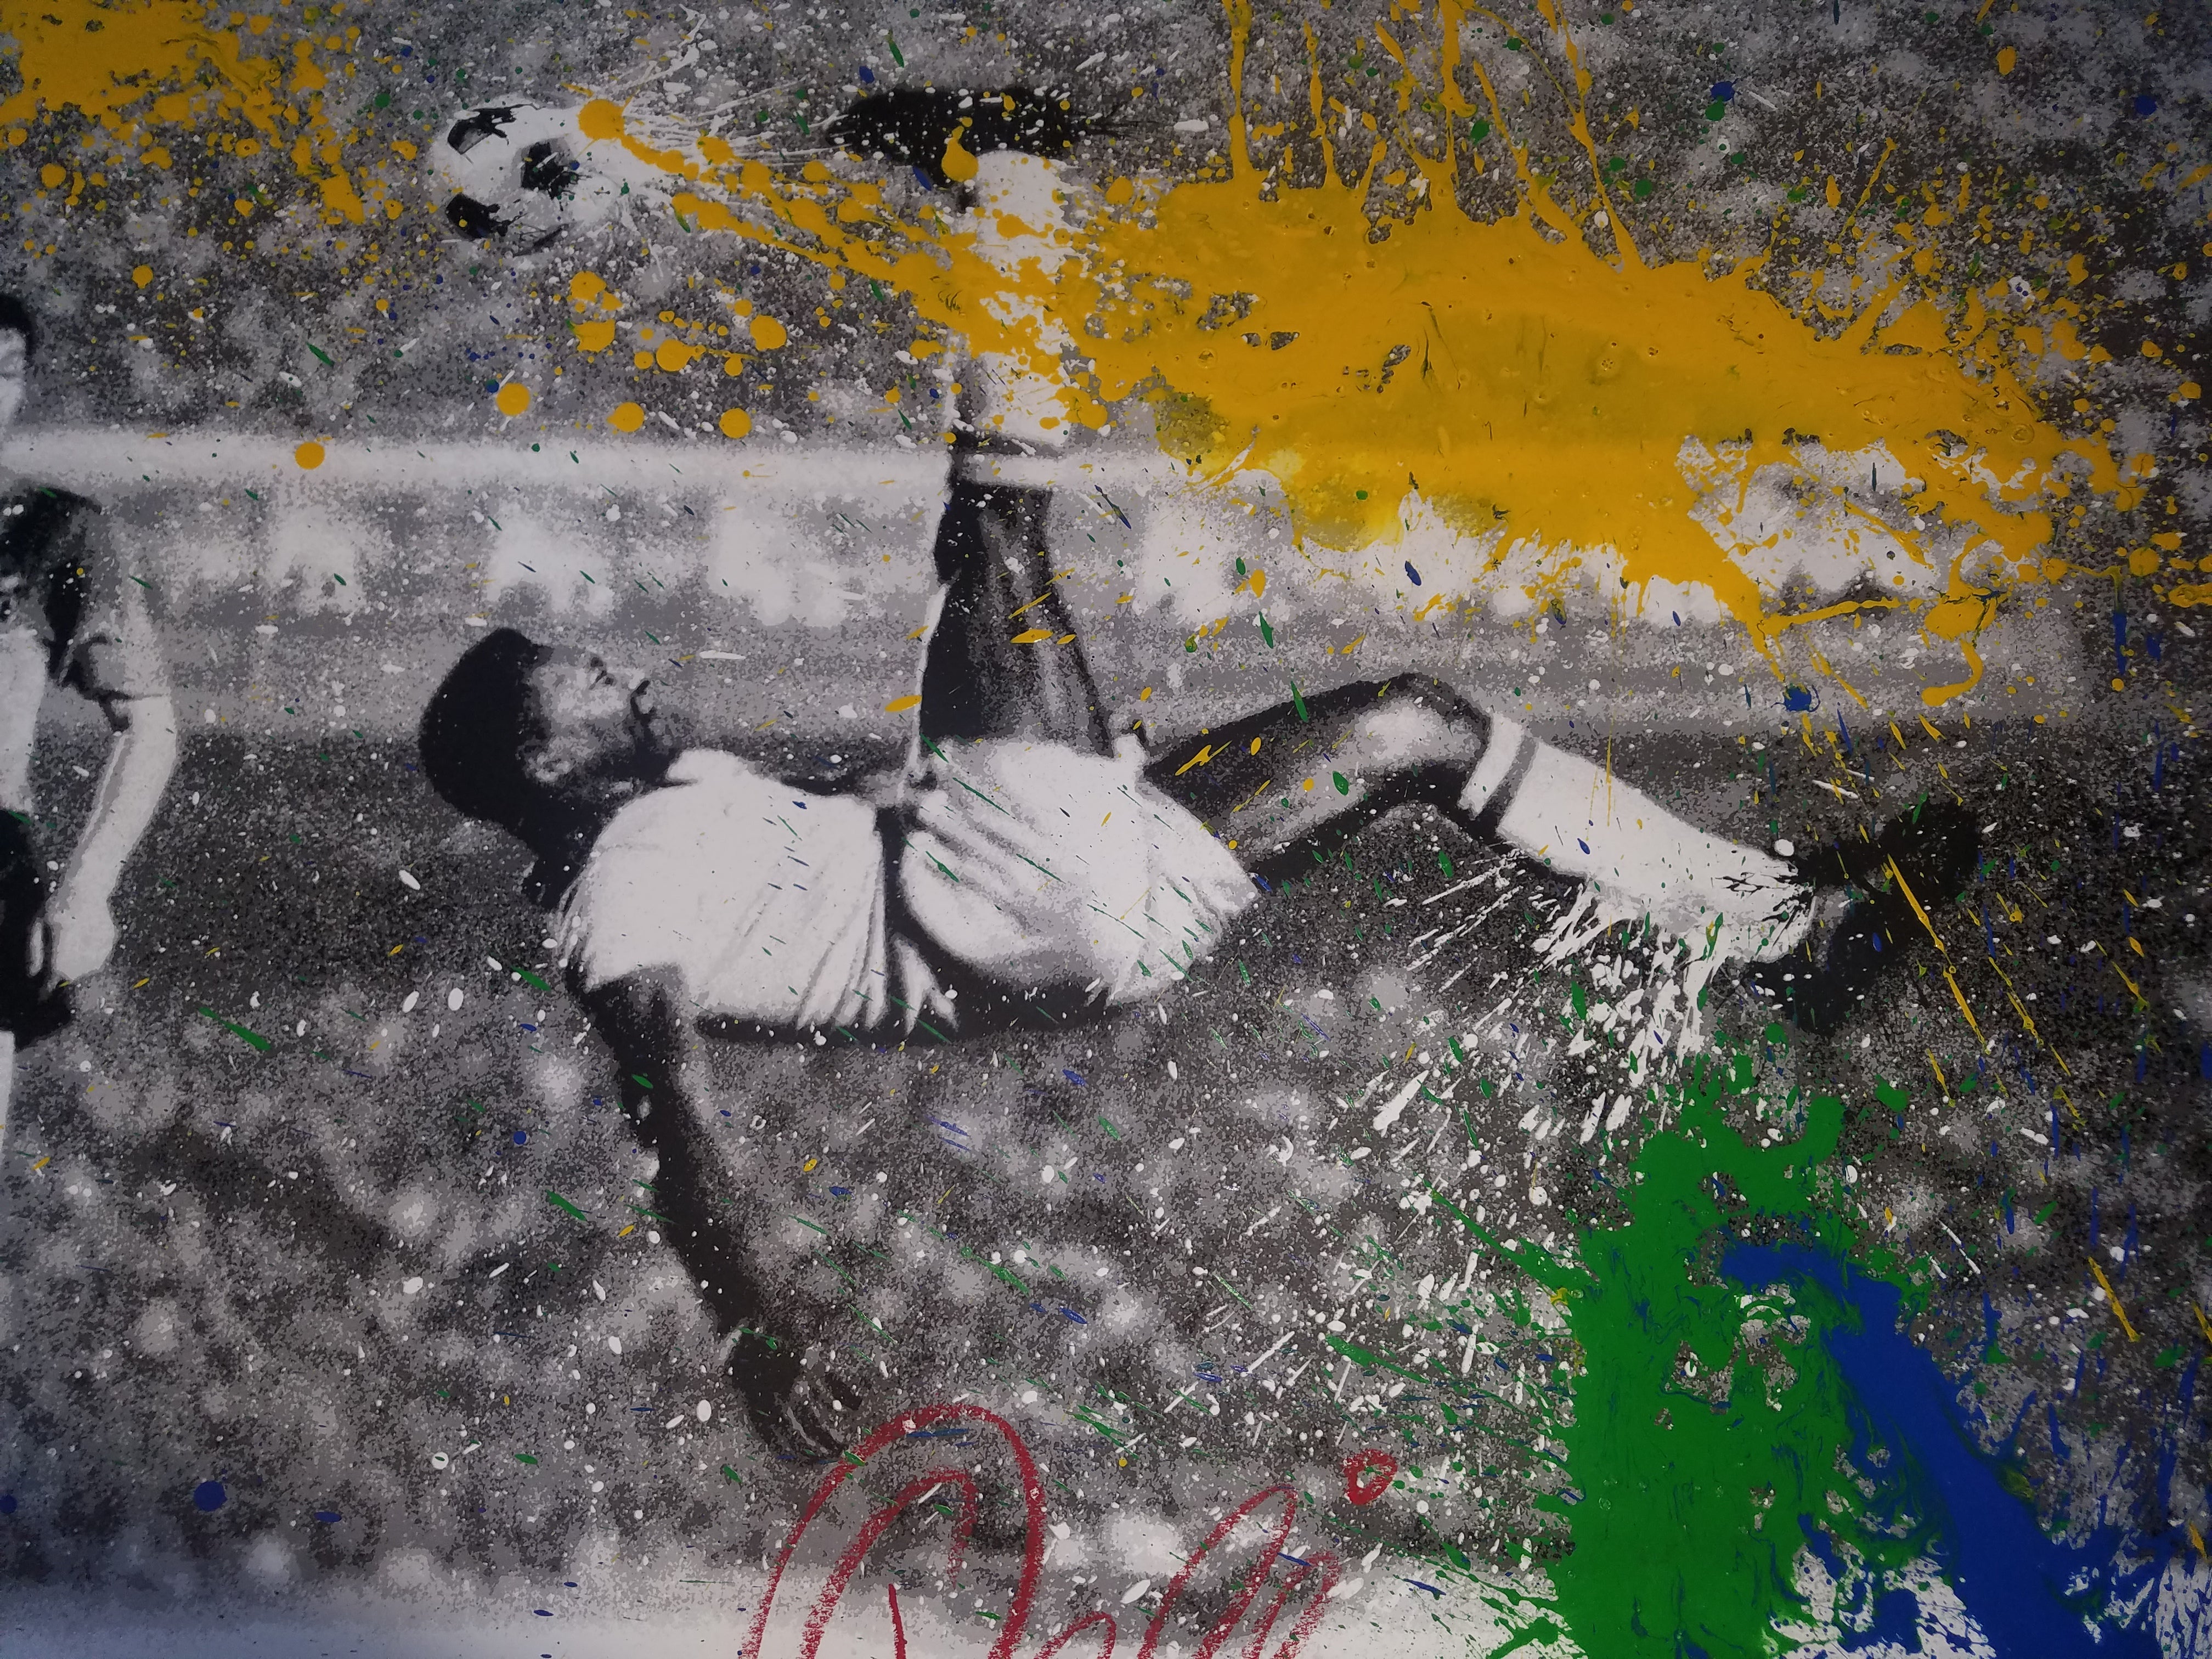 Title: The King Pele  Artist:  Mr. Brainwash  Edition: Edition of 75, hand finished by the artist. Print is also signed by Pele and the artist, numbered with thumb prints on the back  Type: Five color screen print on hand torn archival art paper.  Size: 48" x 36"  Notes: Certificate of authenticity will also be included.  Check out our other listings for more hard-to-find and out-of-print posters.   Ready to ship.